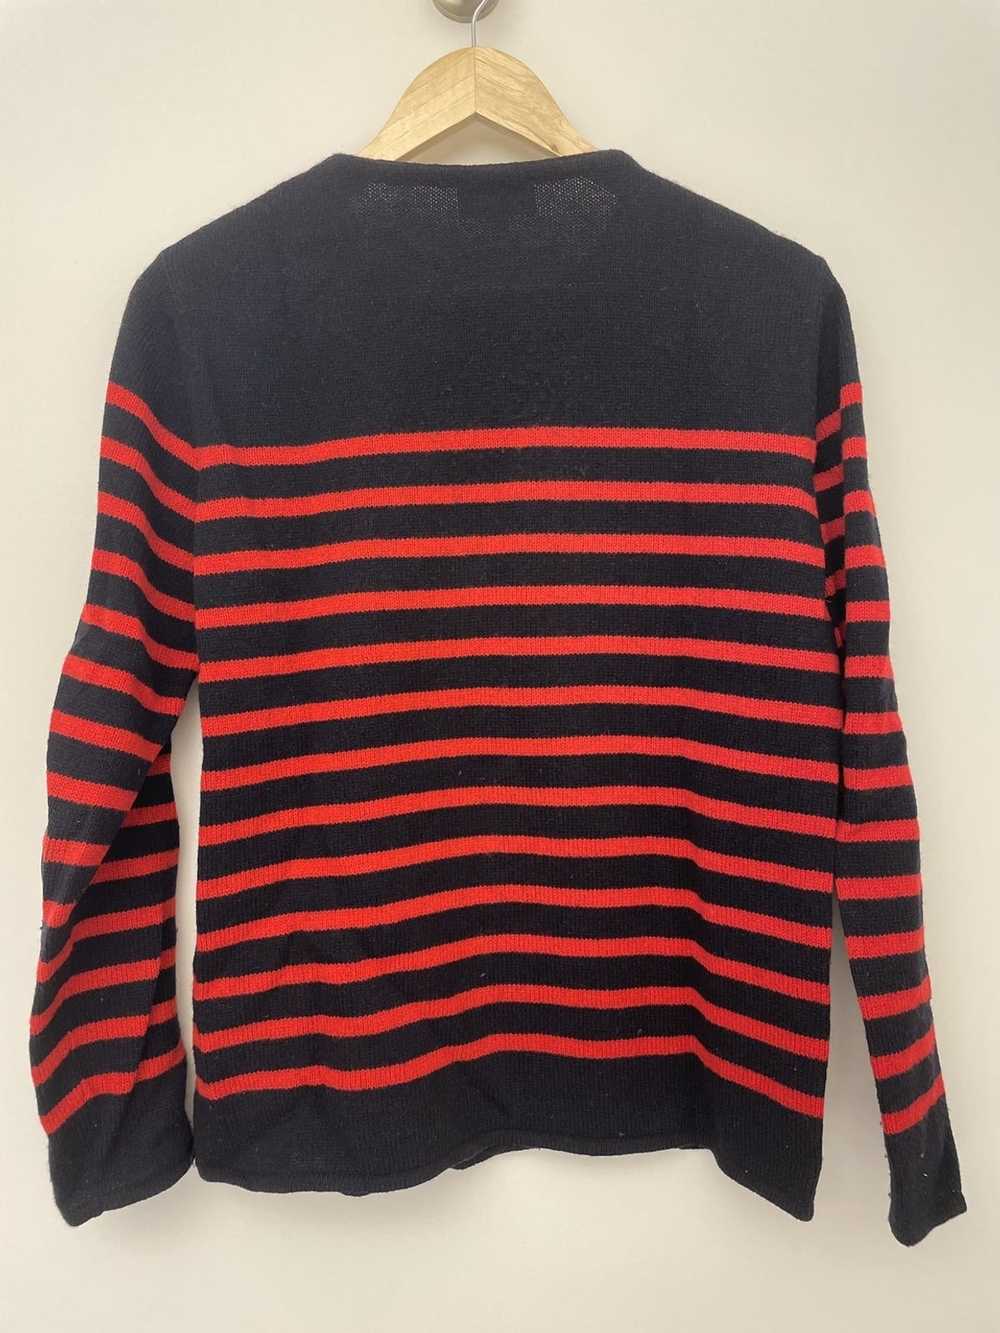 A.P.C. Blue and red striped wool sweater - image 2